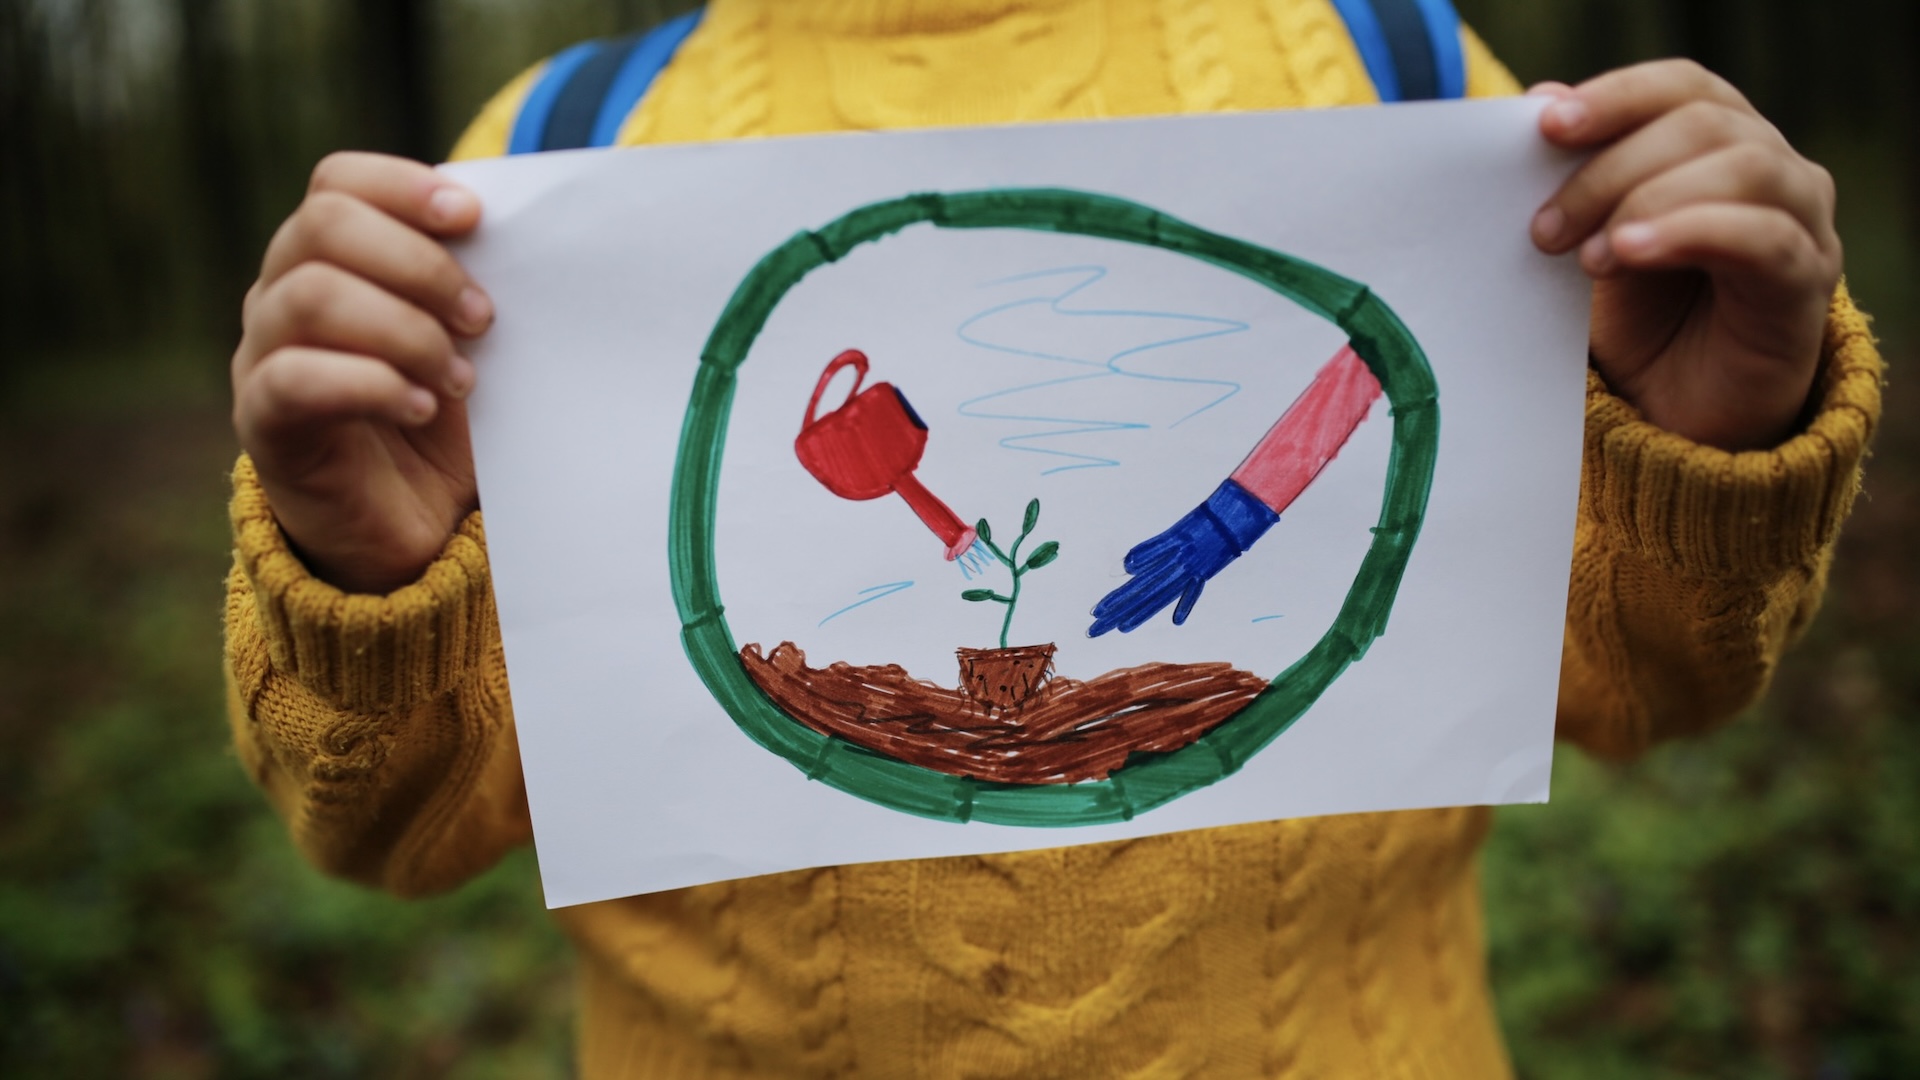 child with drawing of a growing plant